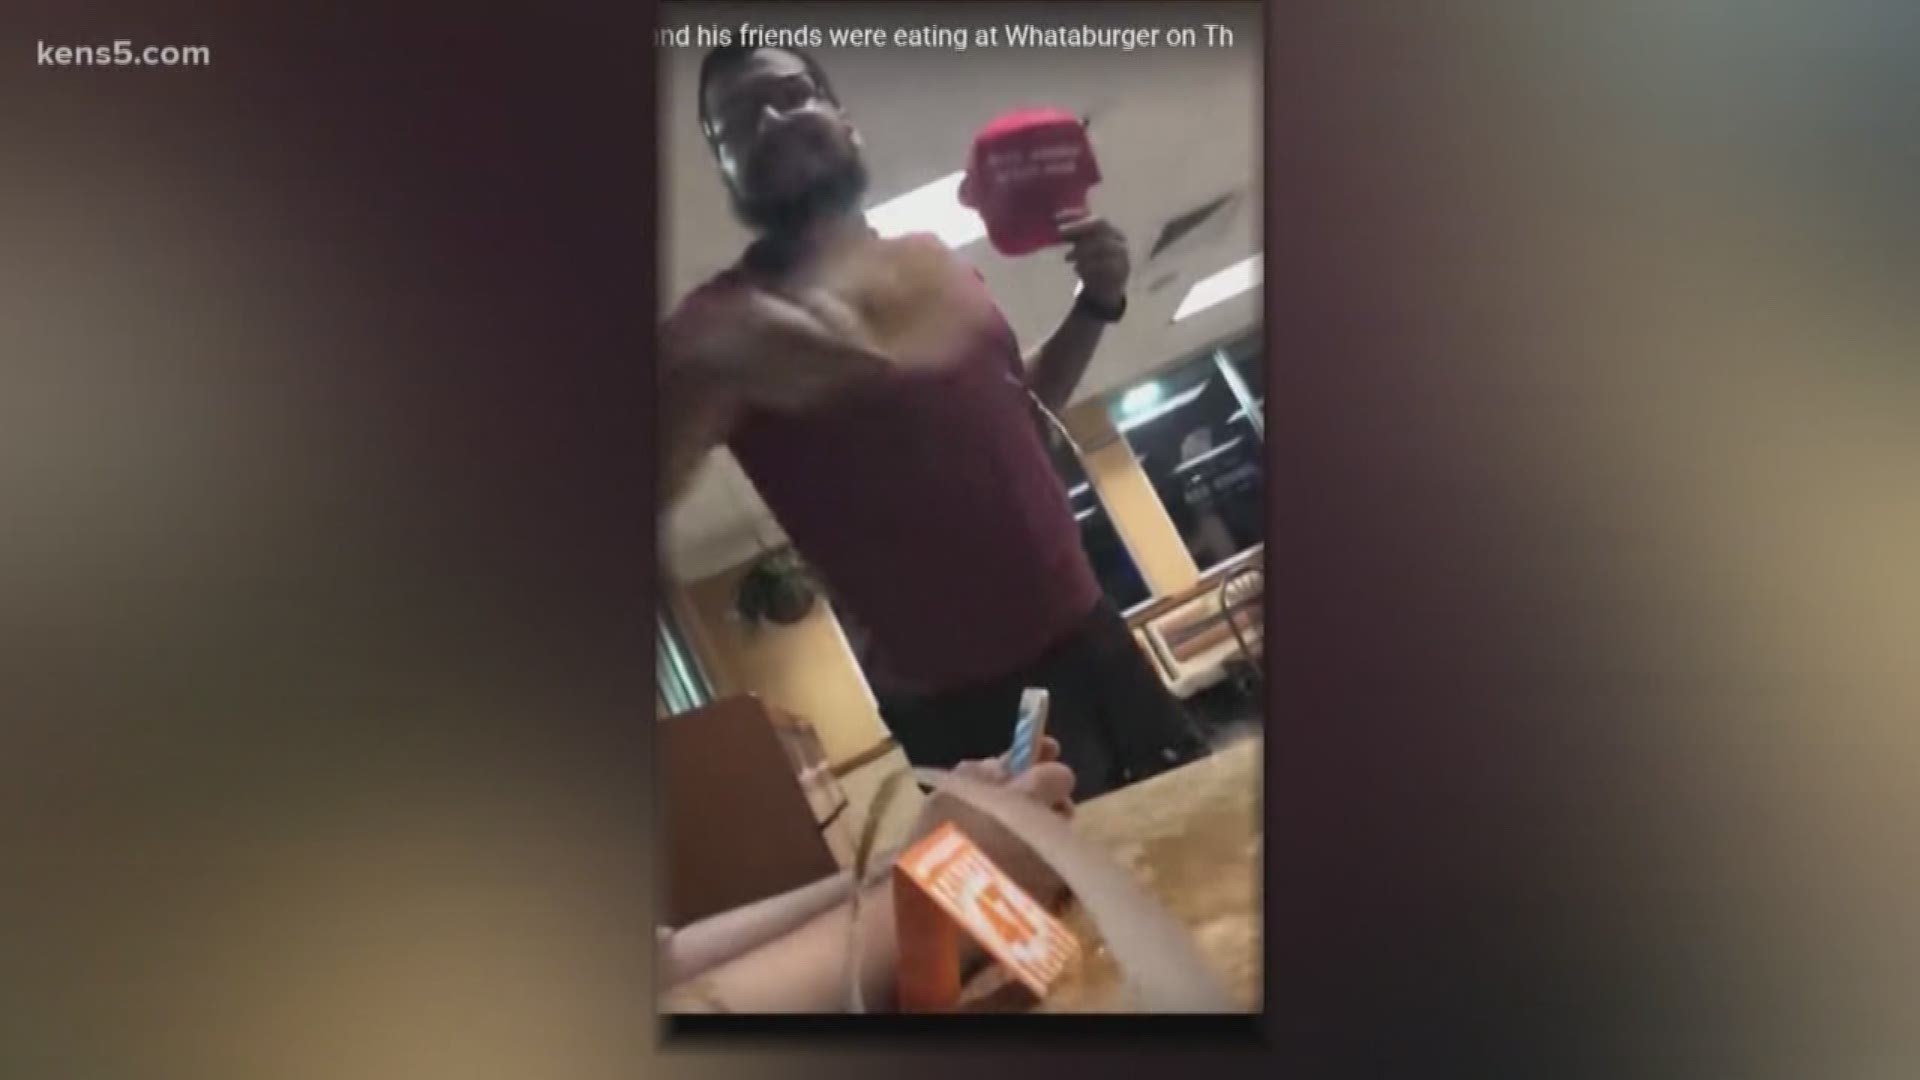 WARNING GRAPHIC LANGUAGE: A viral Facebook post claims to show a man becoming very angry and splashing a drink at teenagers over a "patriotic hat."